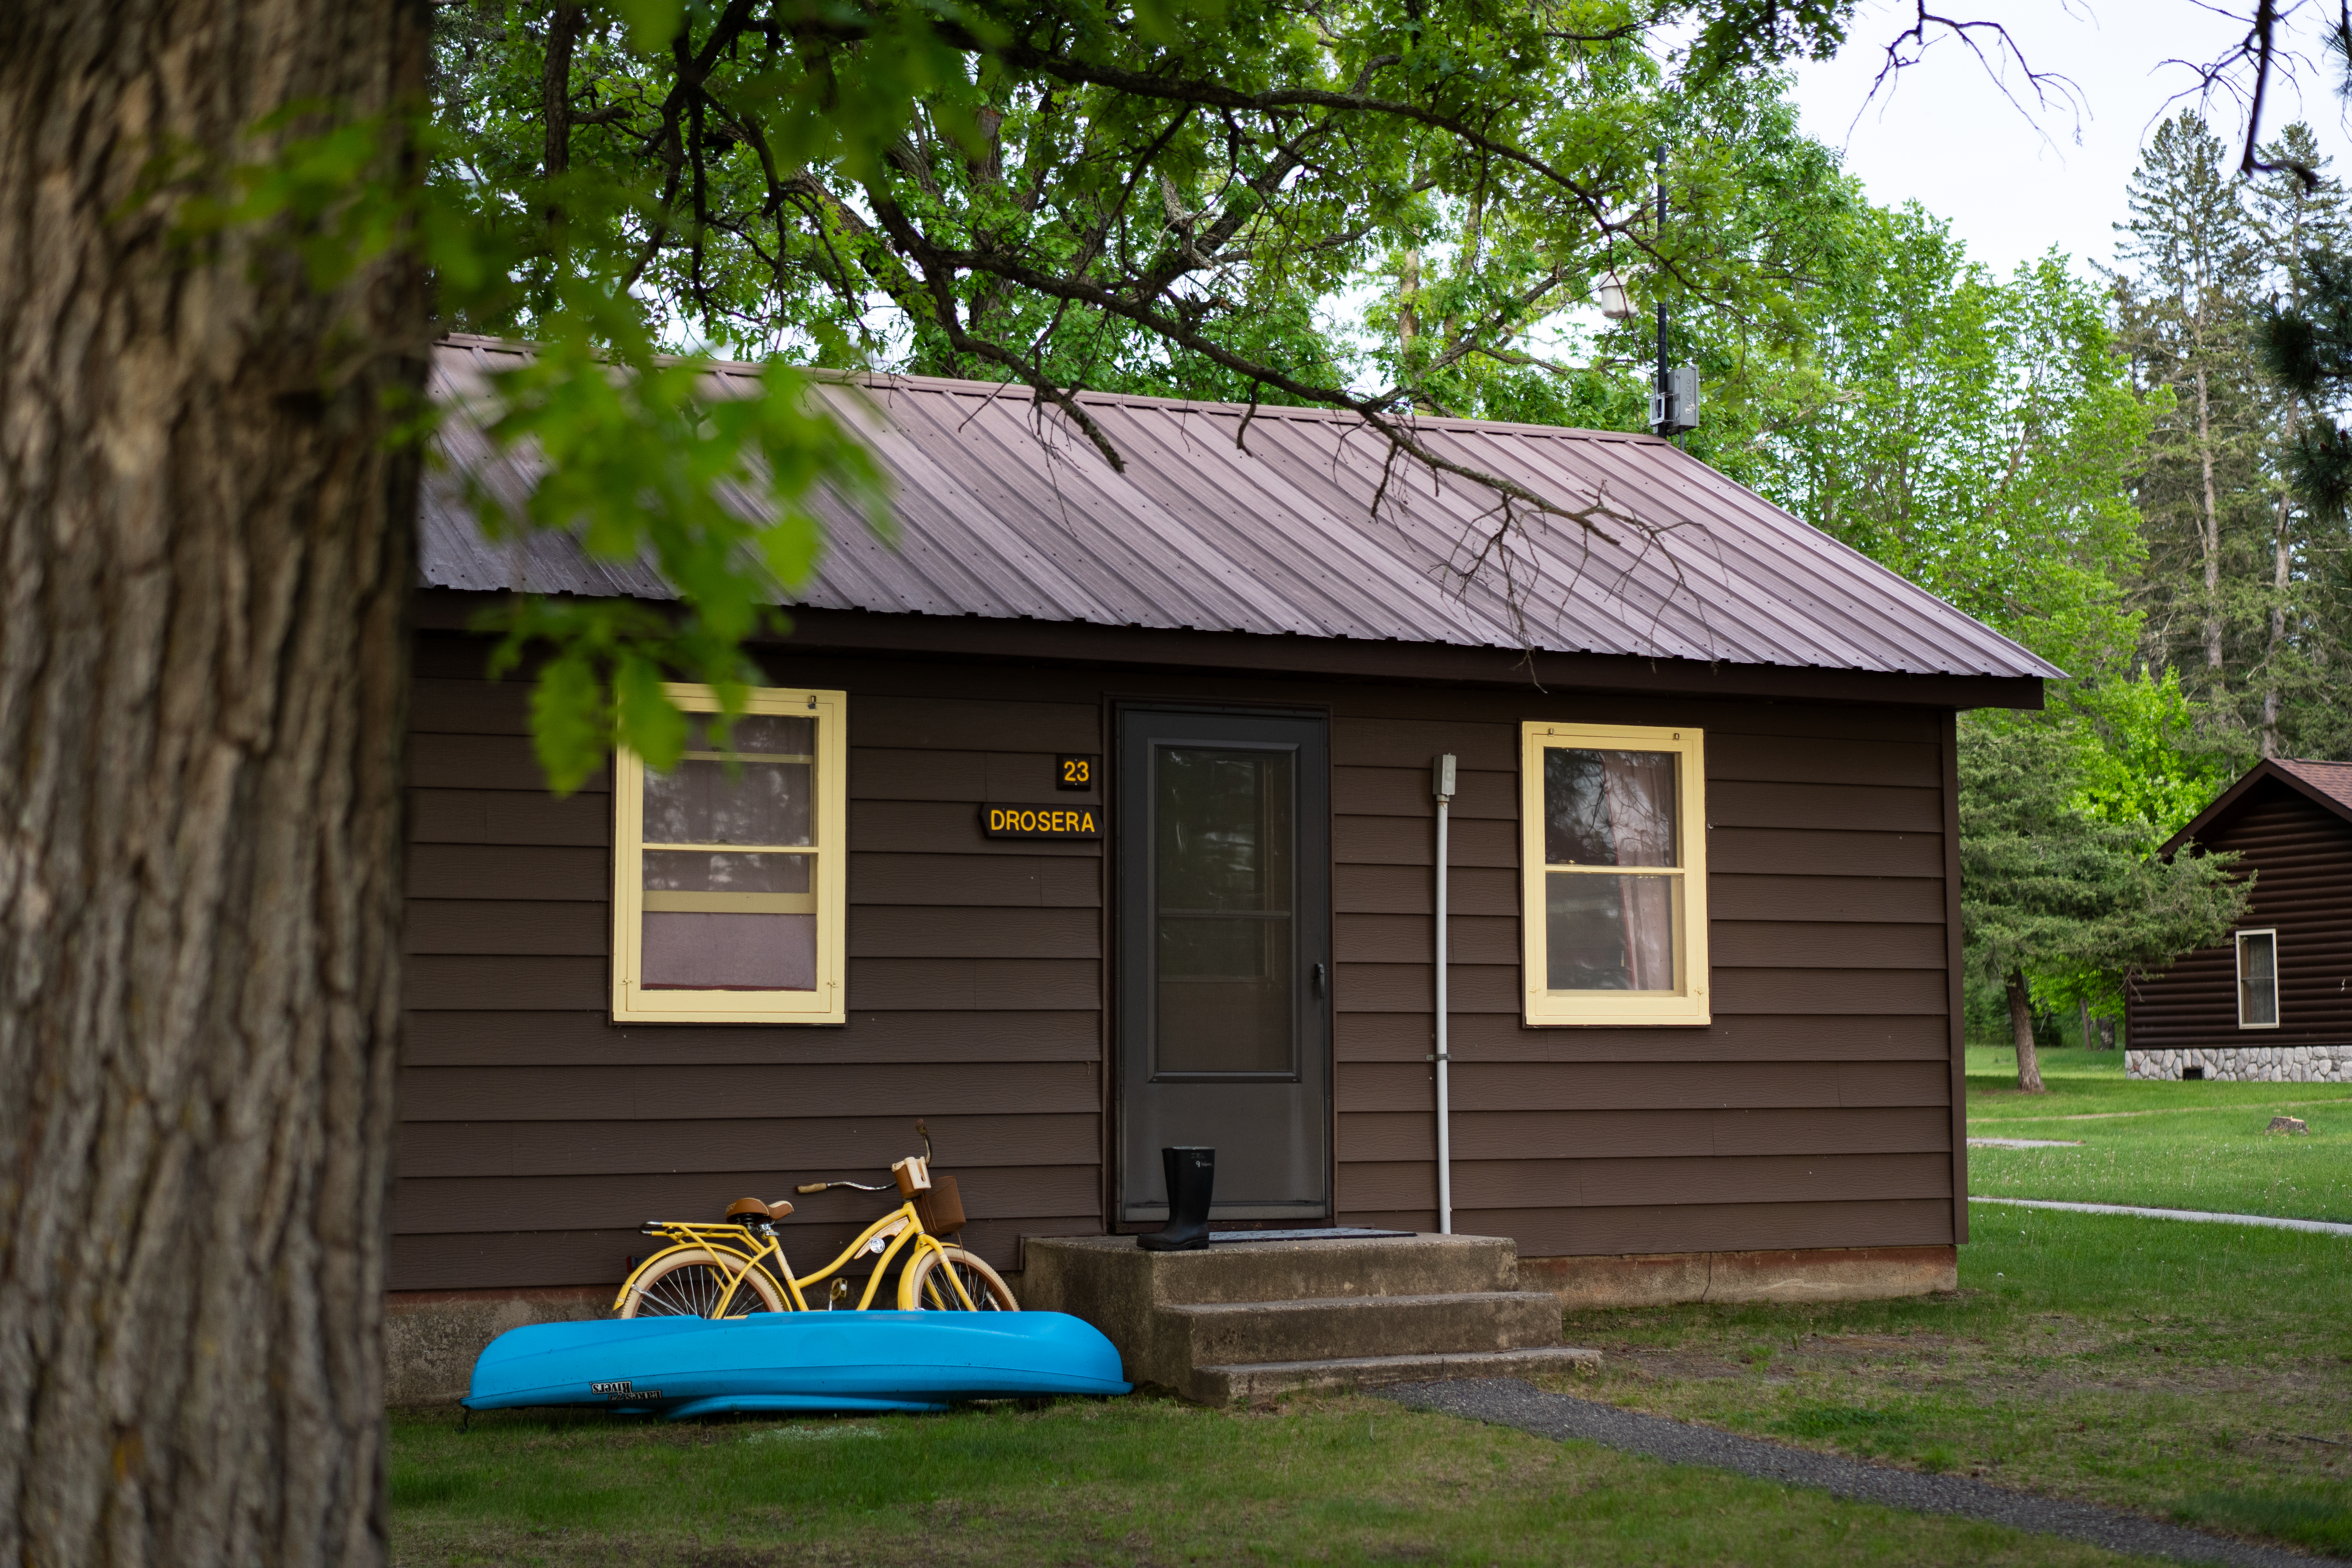 Student bunkhouse cabin #23 at Itasca Station, with a yellow bicycle and blue kayak leaning against the front of the building.